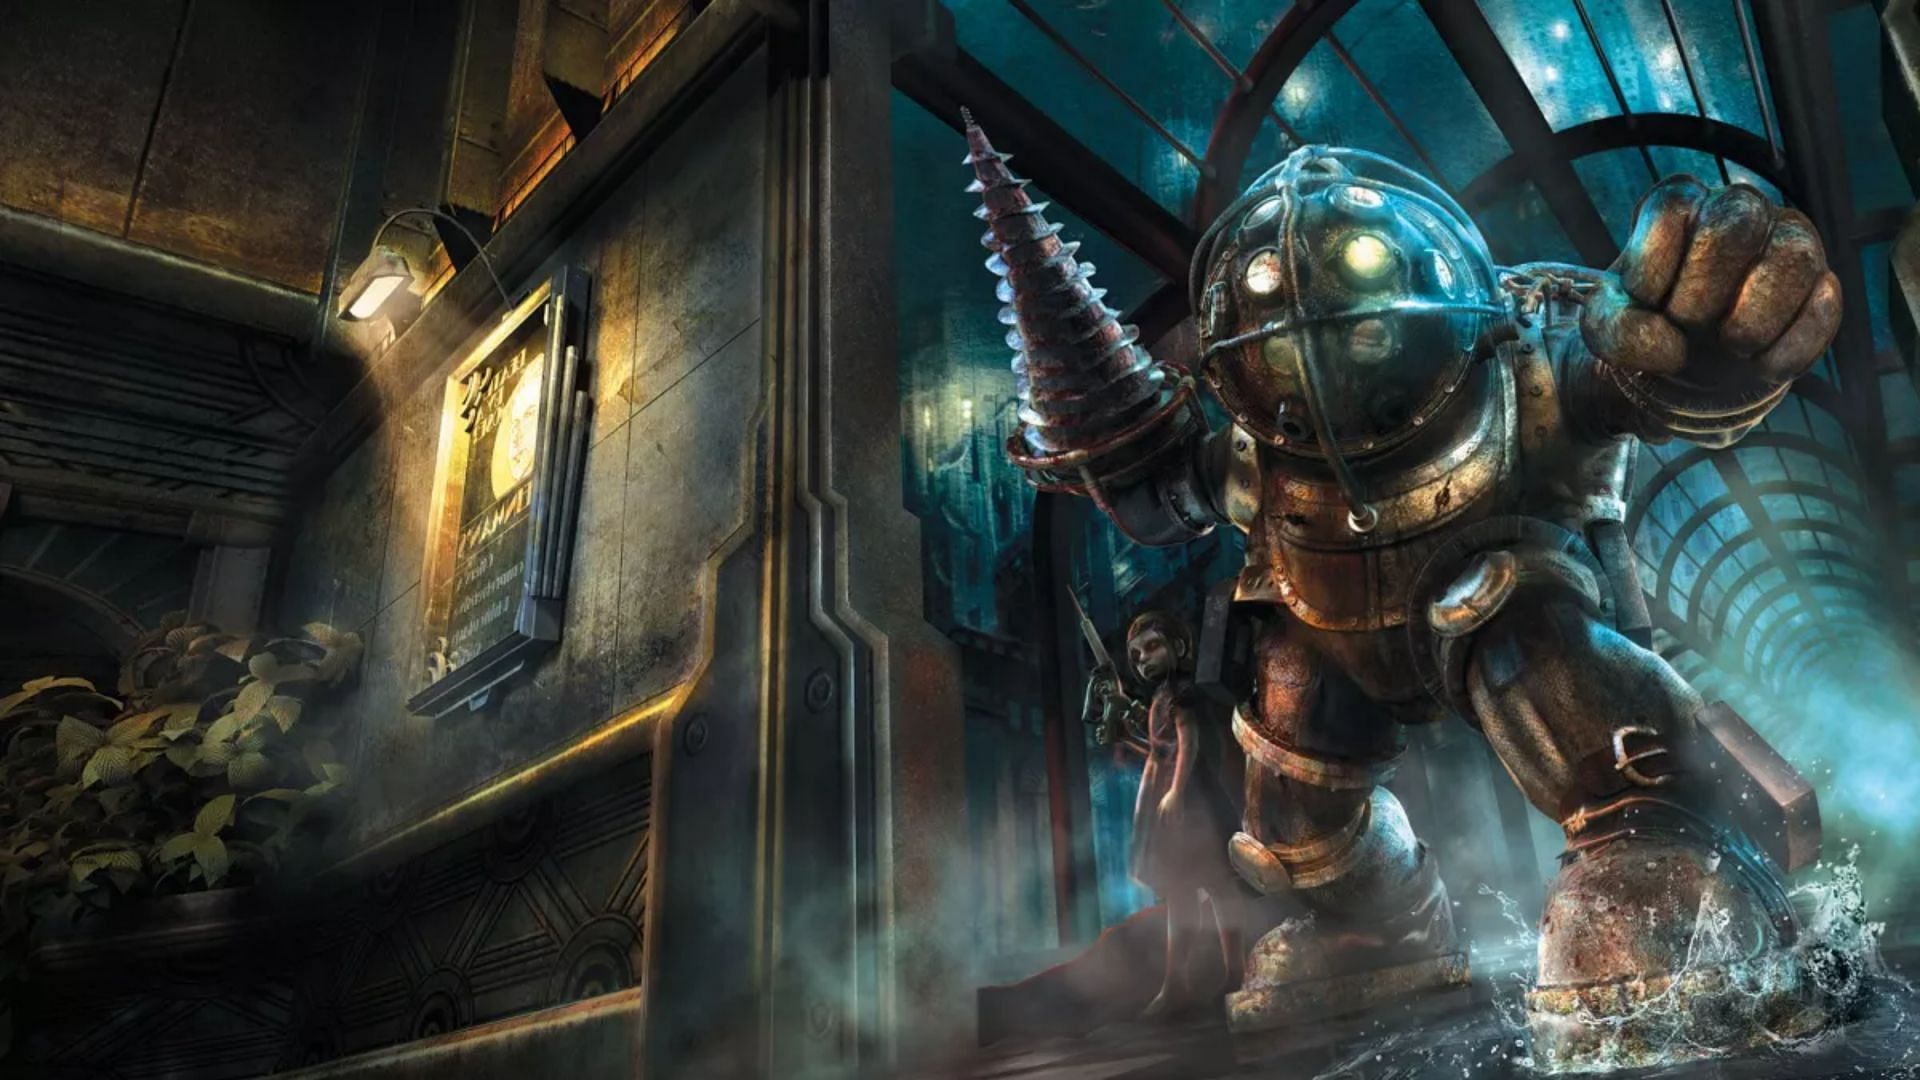 The Big Daddy and his Little Sister from Bioshock 2 (Image via 2K Games)